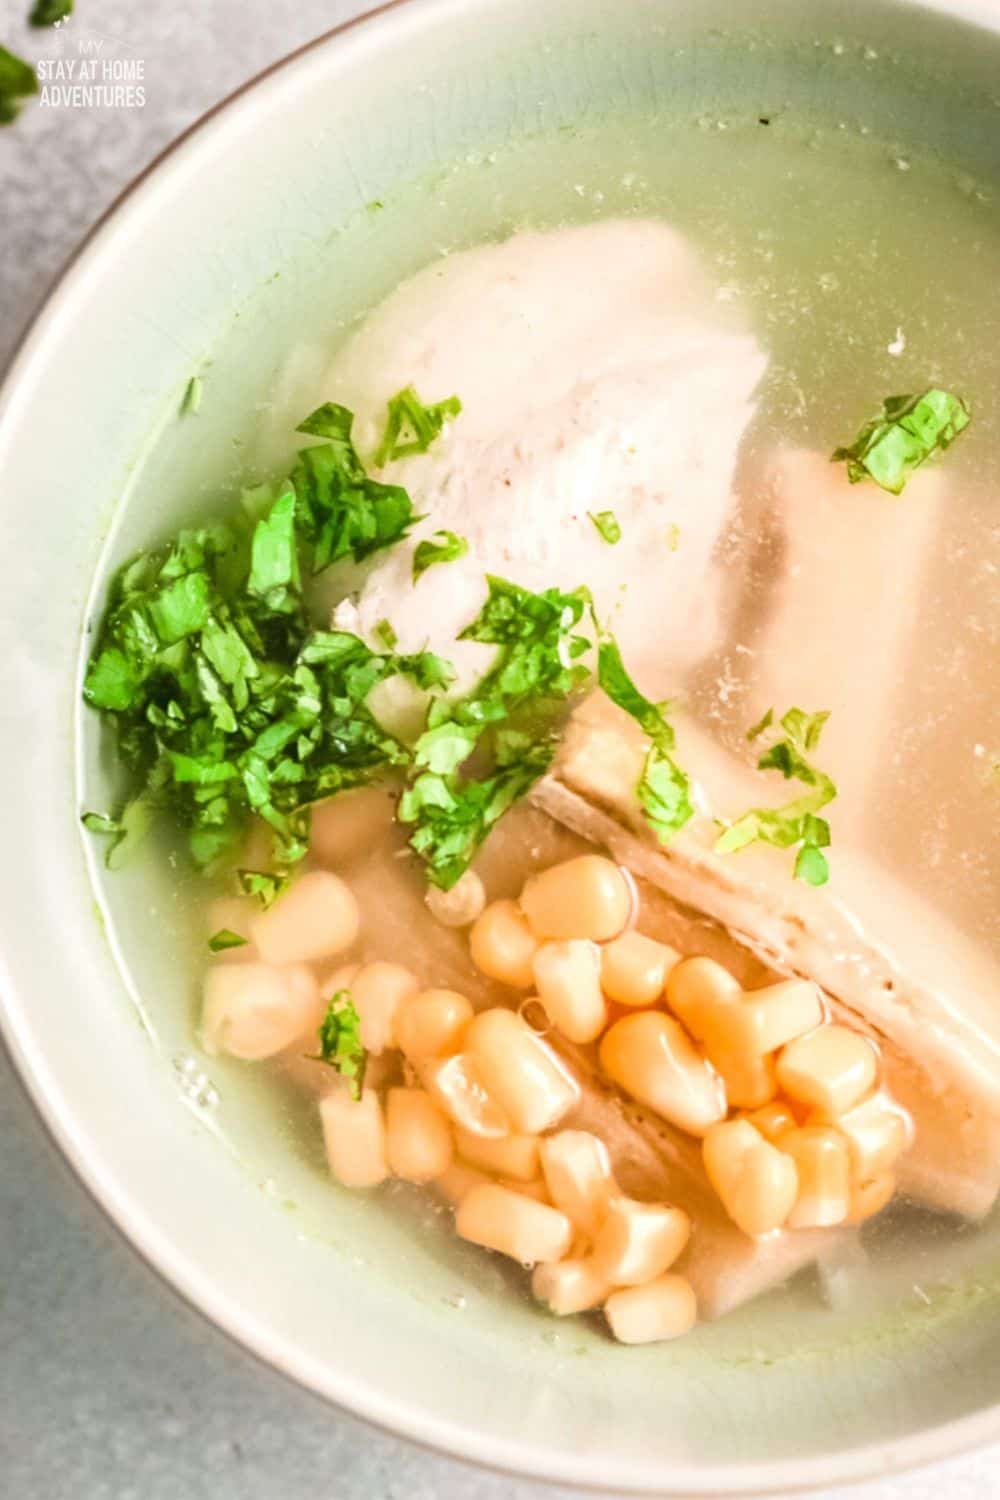 Learn how to make easy sopas de pollo y platanos (plantain and chicken soup) and learn why this dish is so loved by many. via @mystayathome